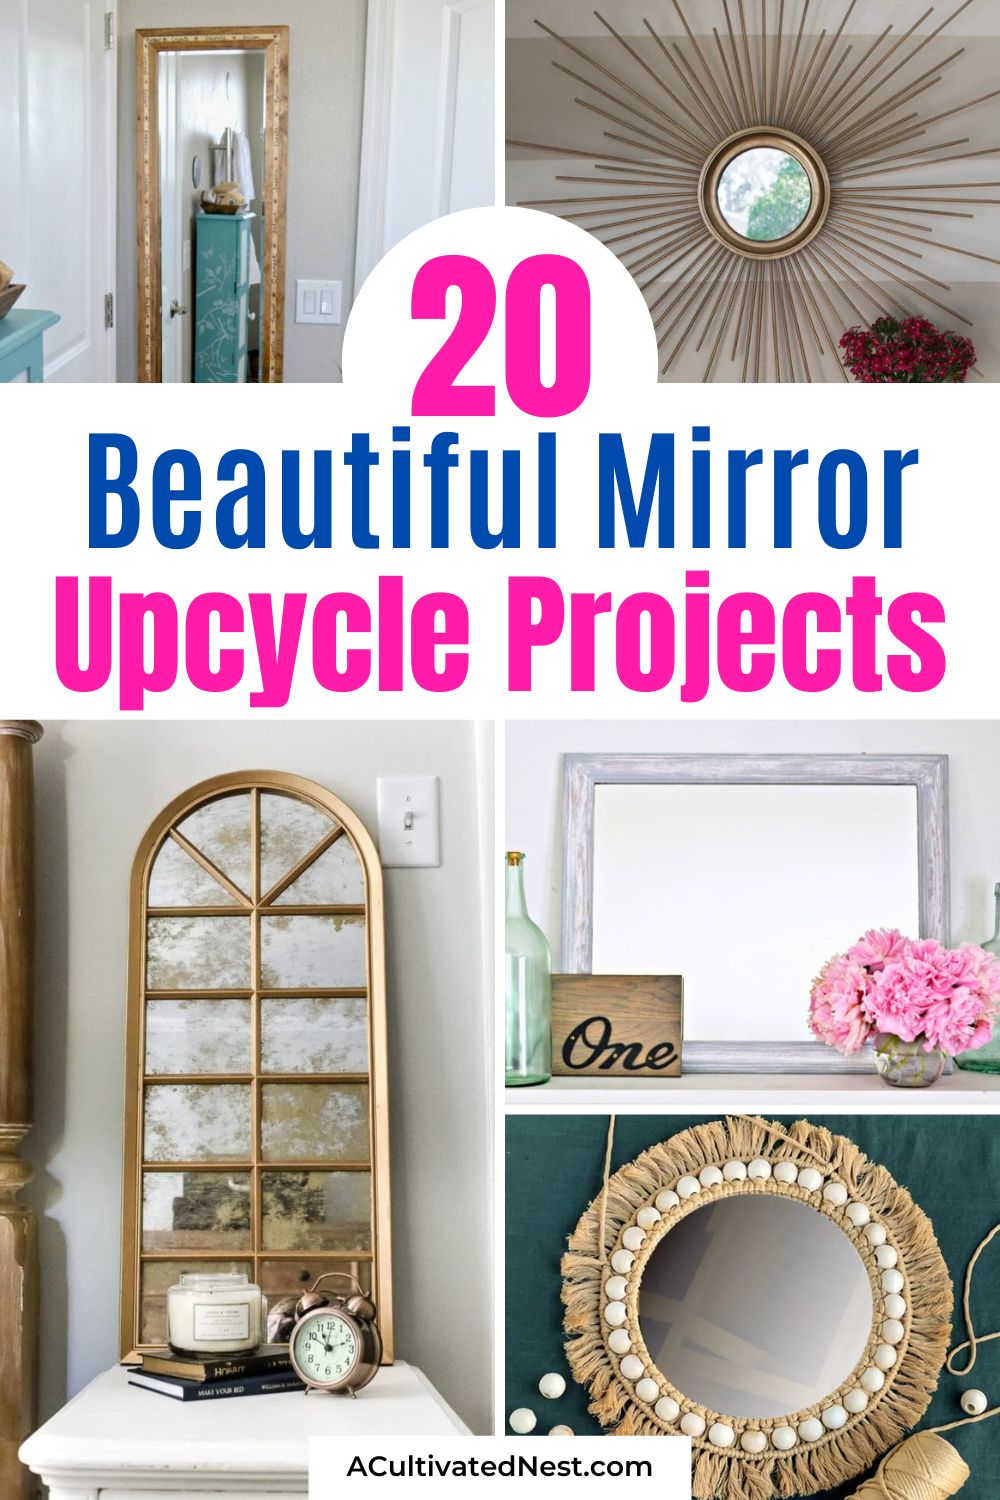 20 Beautiful Mirror Upcycles- Transform old mirrors into unique masterpieces with these beautiful mirror upcycle projects! Whether you're looking for rustic charm or contemporary flair, our curated collection of mirror upcycles has something for every style. | #Repurpose #DIYProjects #HomeImprovement #DecorIdeas #ACultivatedNest